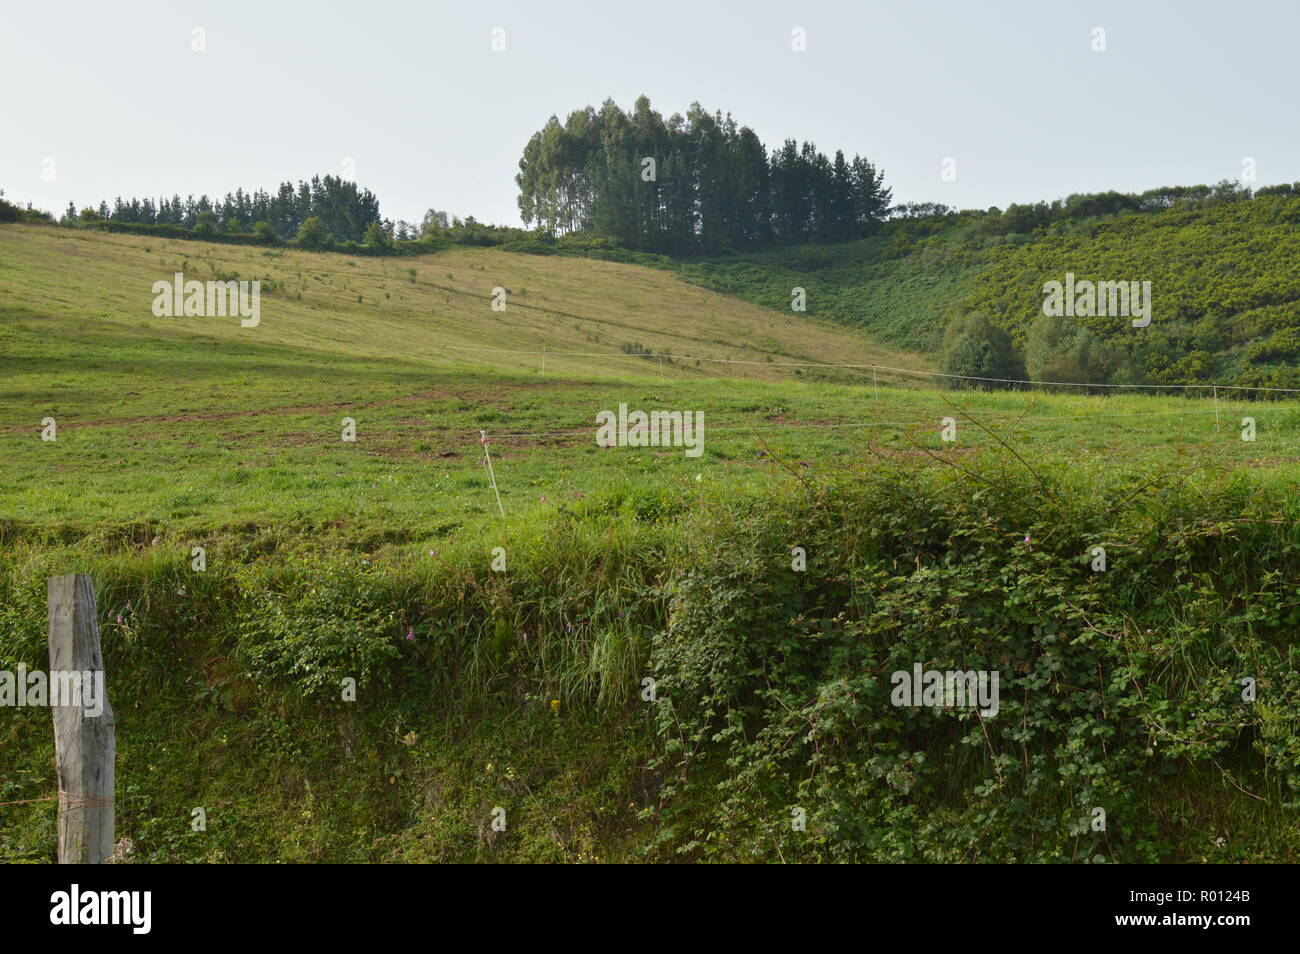 Meadow In The High Of A Mountain In Lugo In Galicia. Nature, Animals, Landscapes, Travel. August 2, 2018. Rebedul, Lugo, Galicia, Spain. Stock Photo